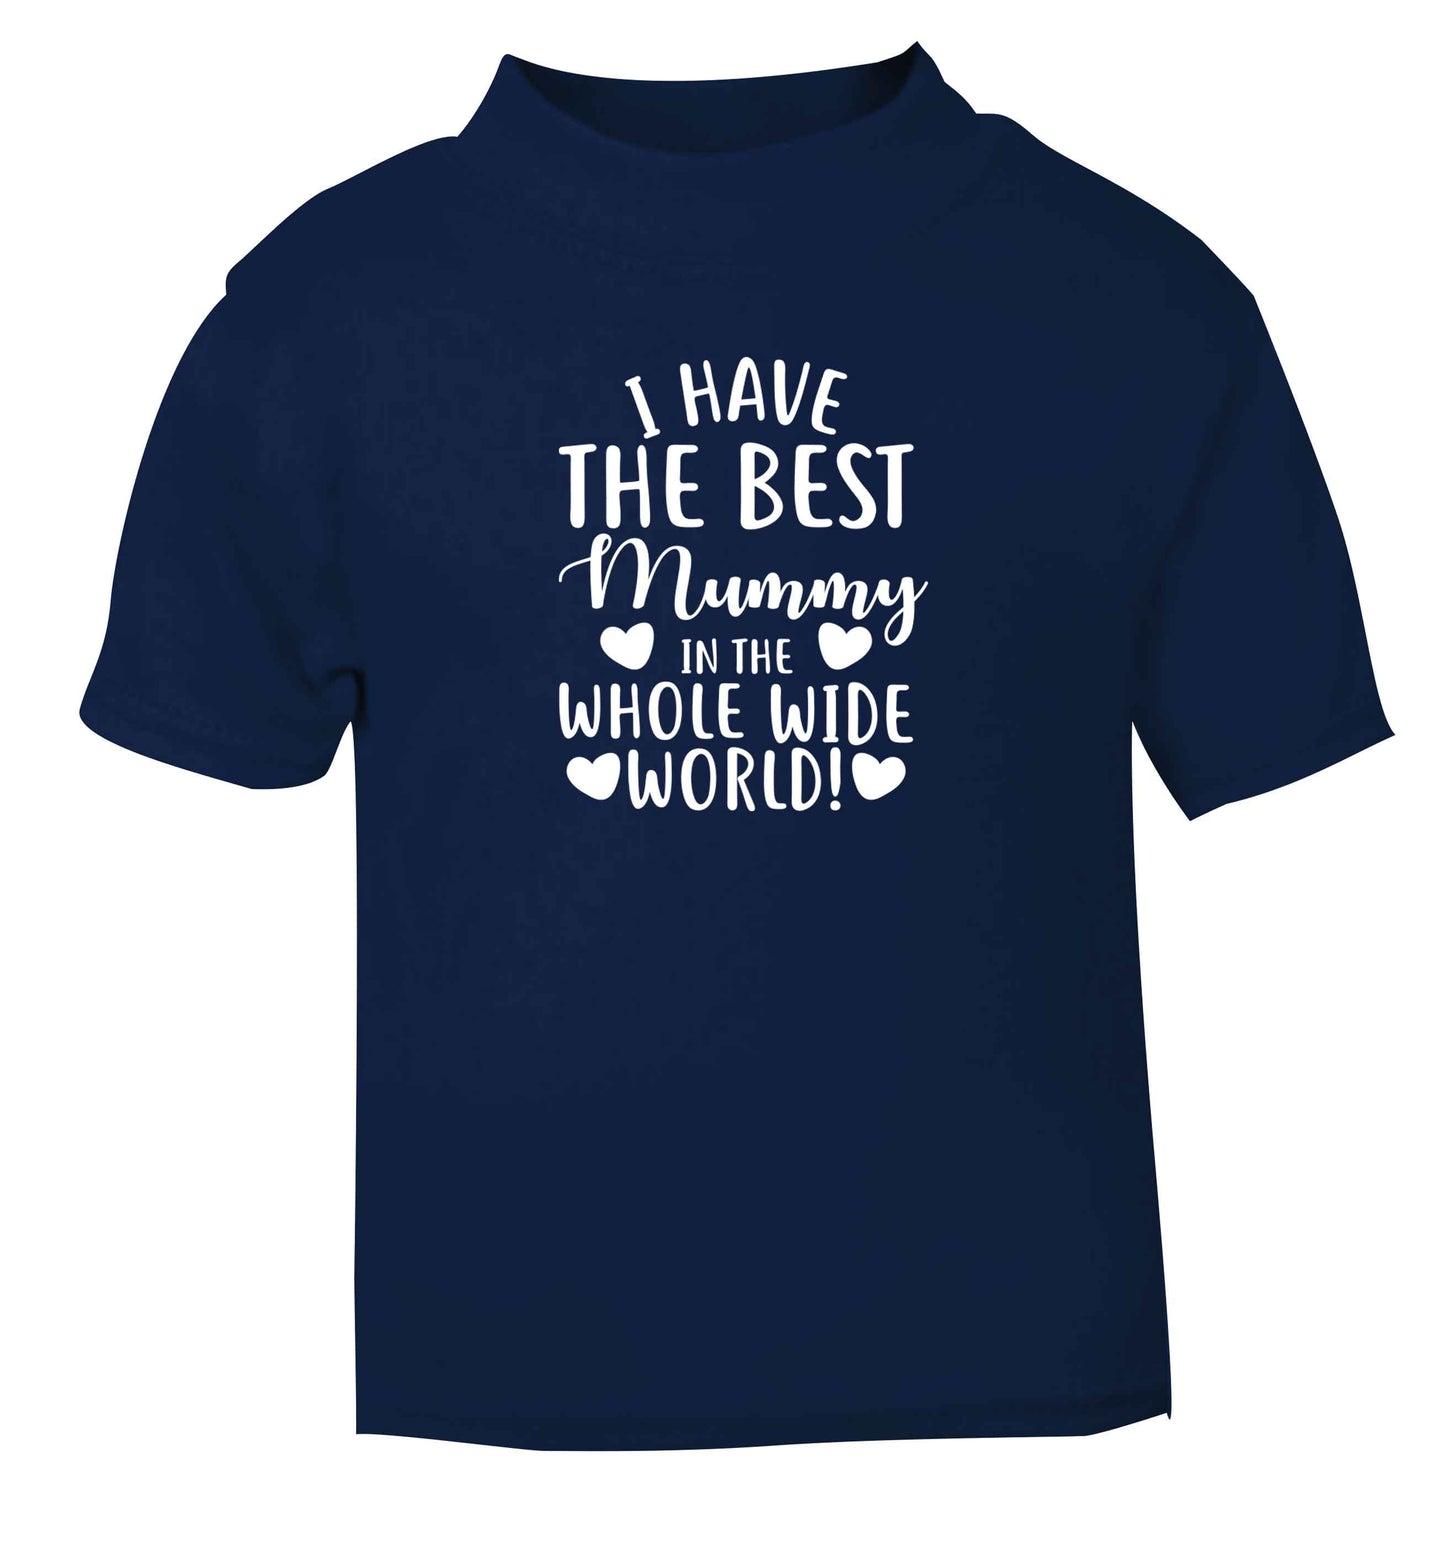 I have the best mummy in the whole wide world navy baby toddler Tshirt 2 Years